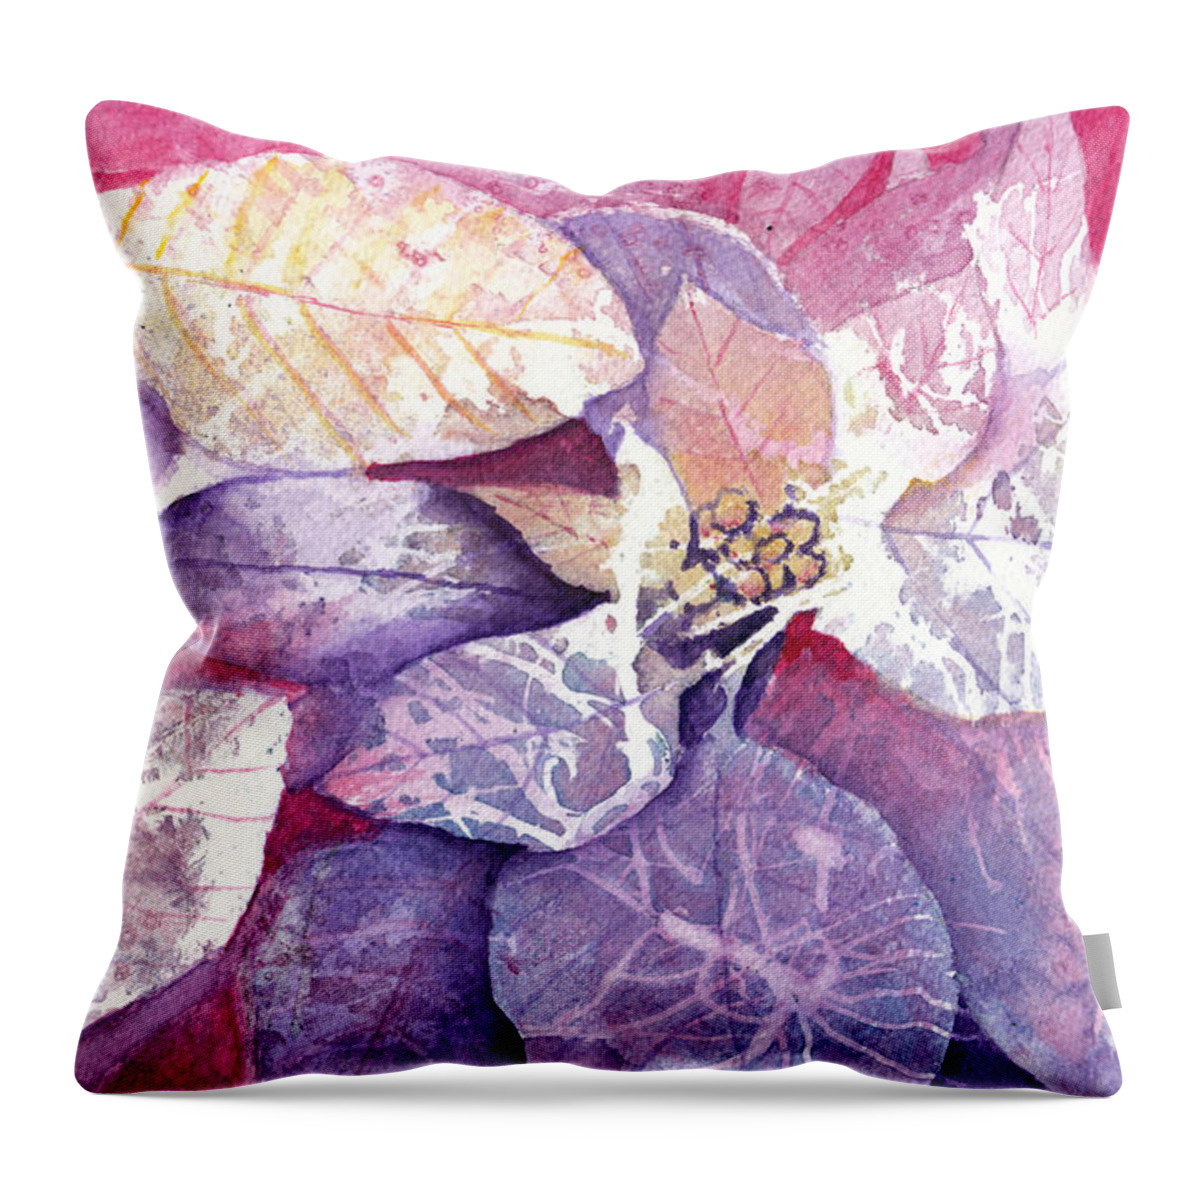 Poinsettia Petals Abstract Throw Pillow featuring the painting Abstract Watercolor Negative Painting Poinsettia by Conni Schaftenaar